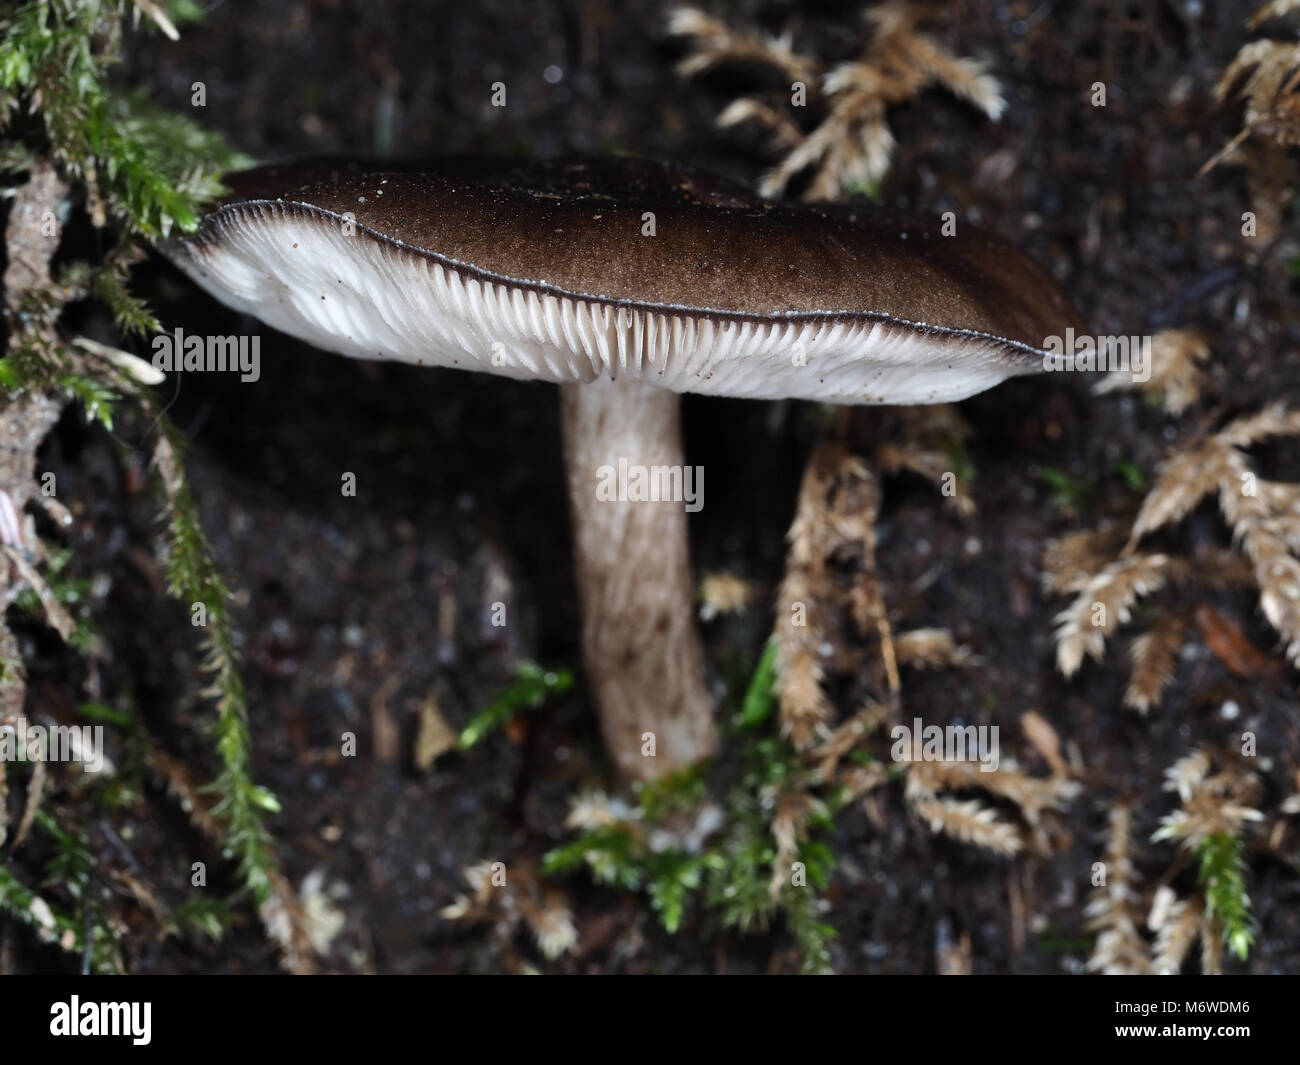 Pluteus cervinus (also known as Pluteus atricapillus) mushroom growing in a Western Washington forest Stock Photo